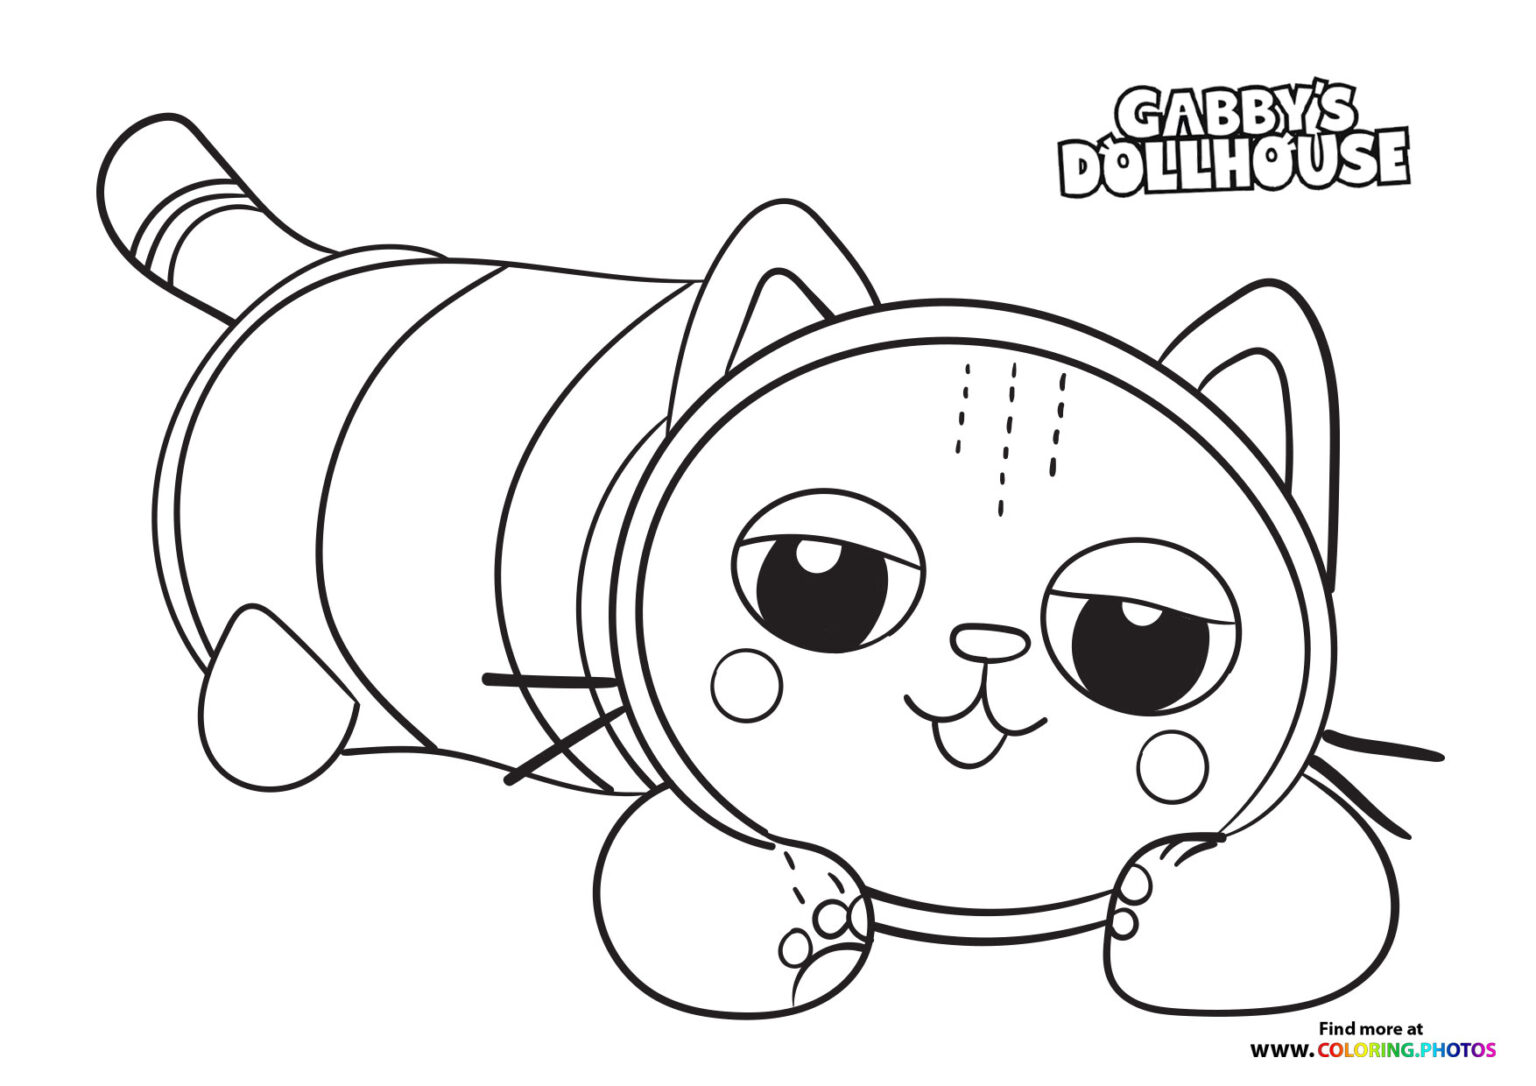 gaby-s-dollhouse-coloring-pages-free-and-easy-printable-coloring-sheets